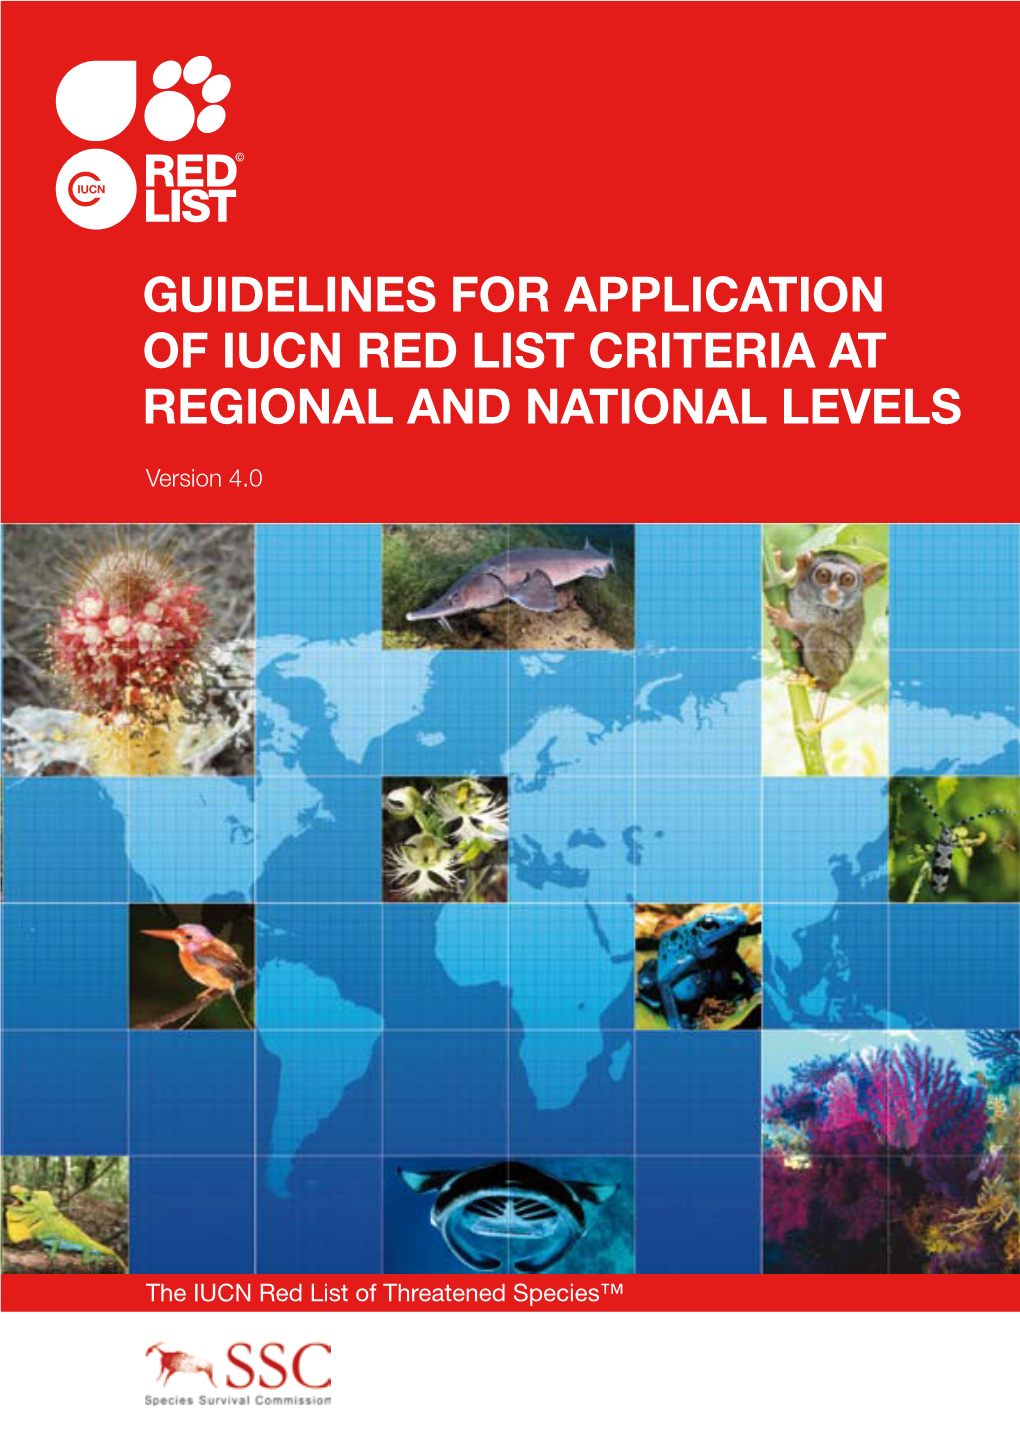 Guidelines for Application of Iucn Red List Criteria at Regional and National Levels